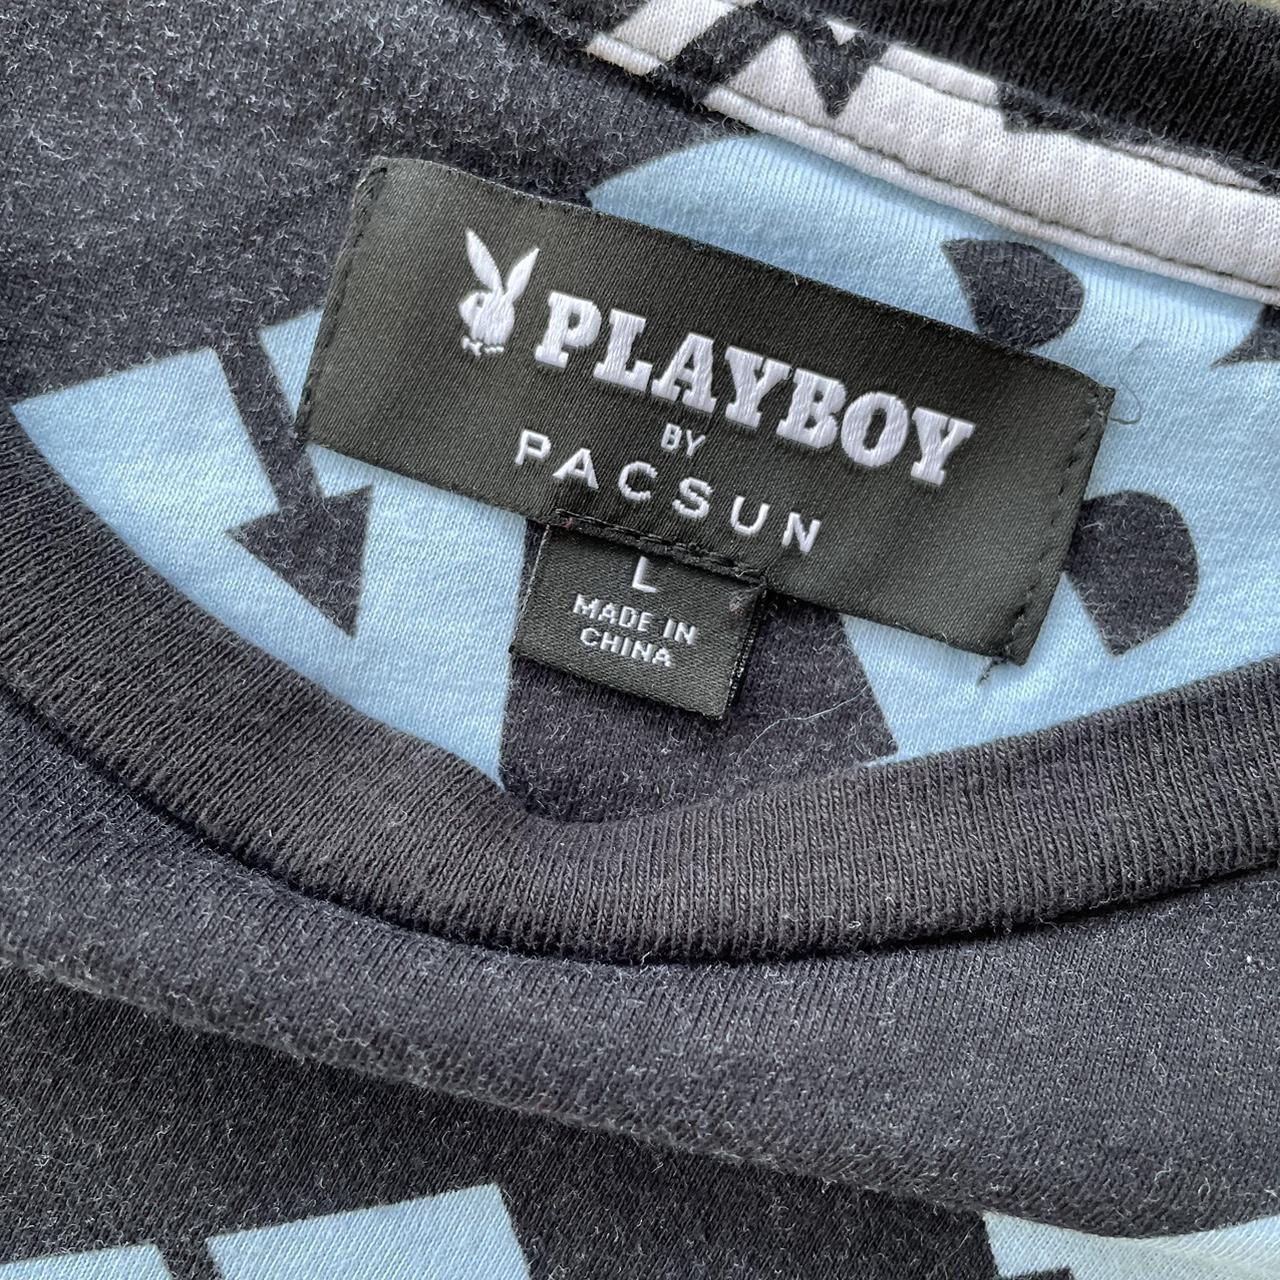 Size Medium pastel playboy graphic tee from pacsun. - Depop